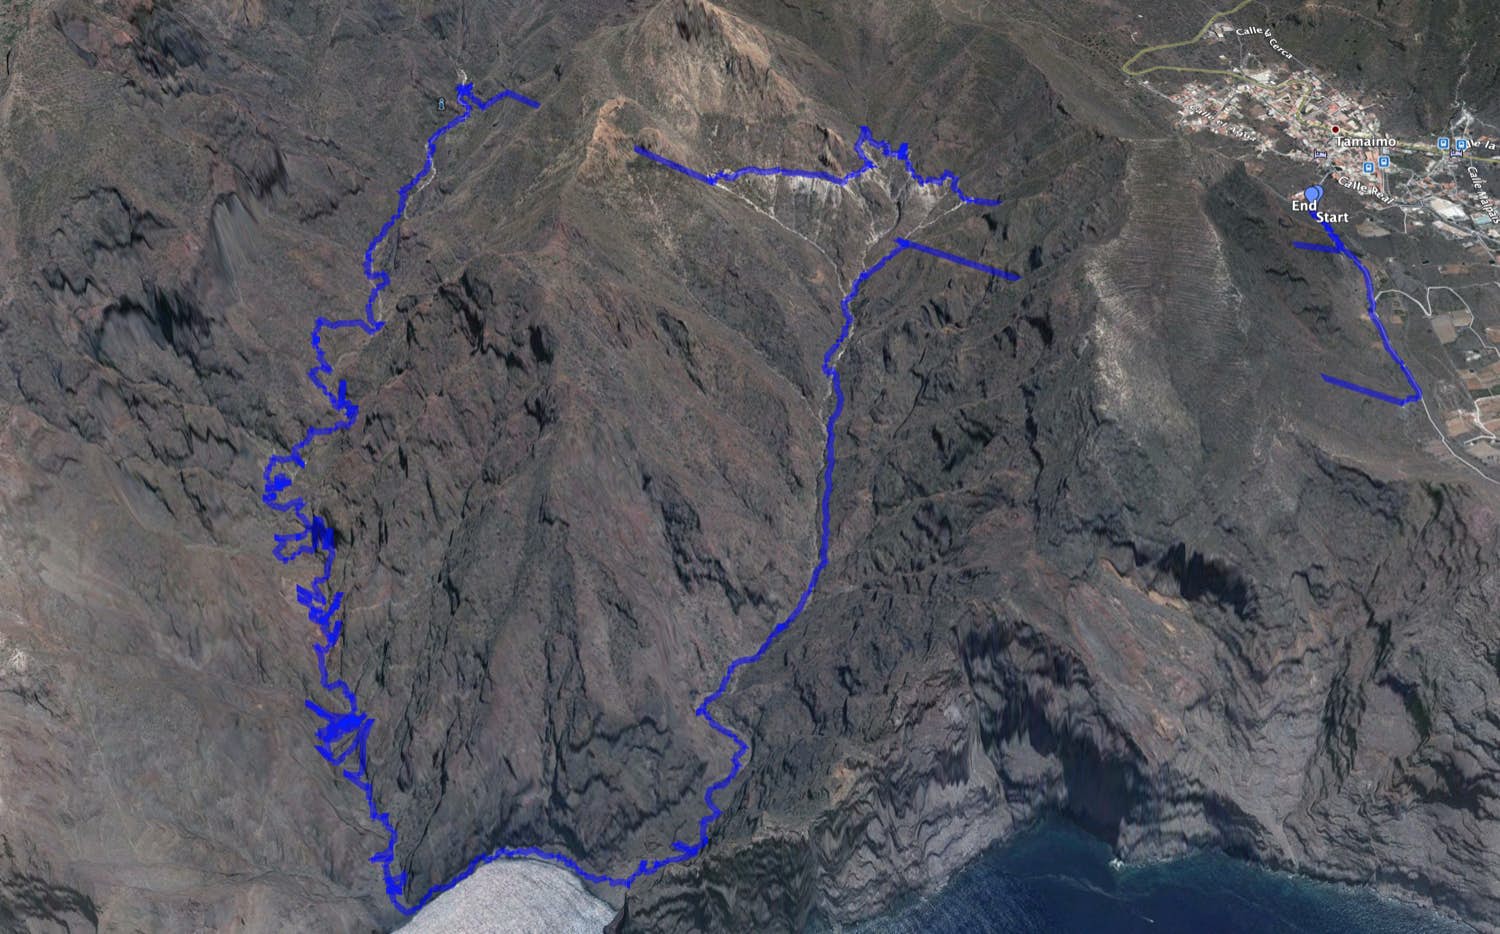 Track of the hike from Tamaimo across the White Channel and back through the Barranco Natero and Barranco Seco